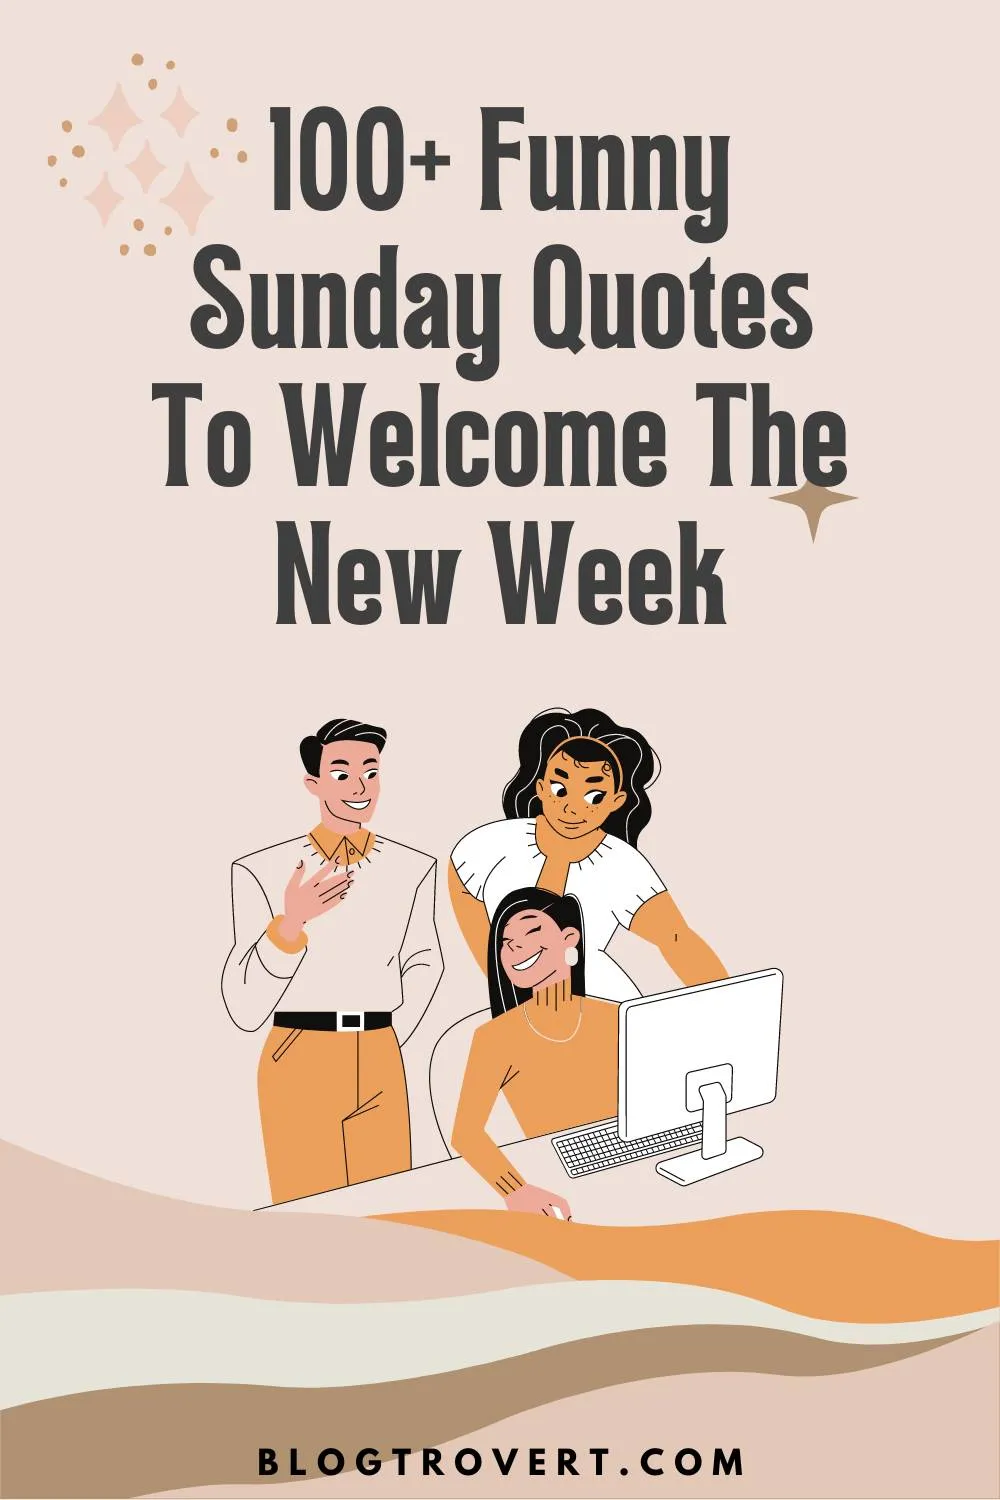 108 funny Sunday quotes to welcome the new week 2